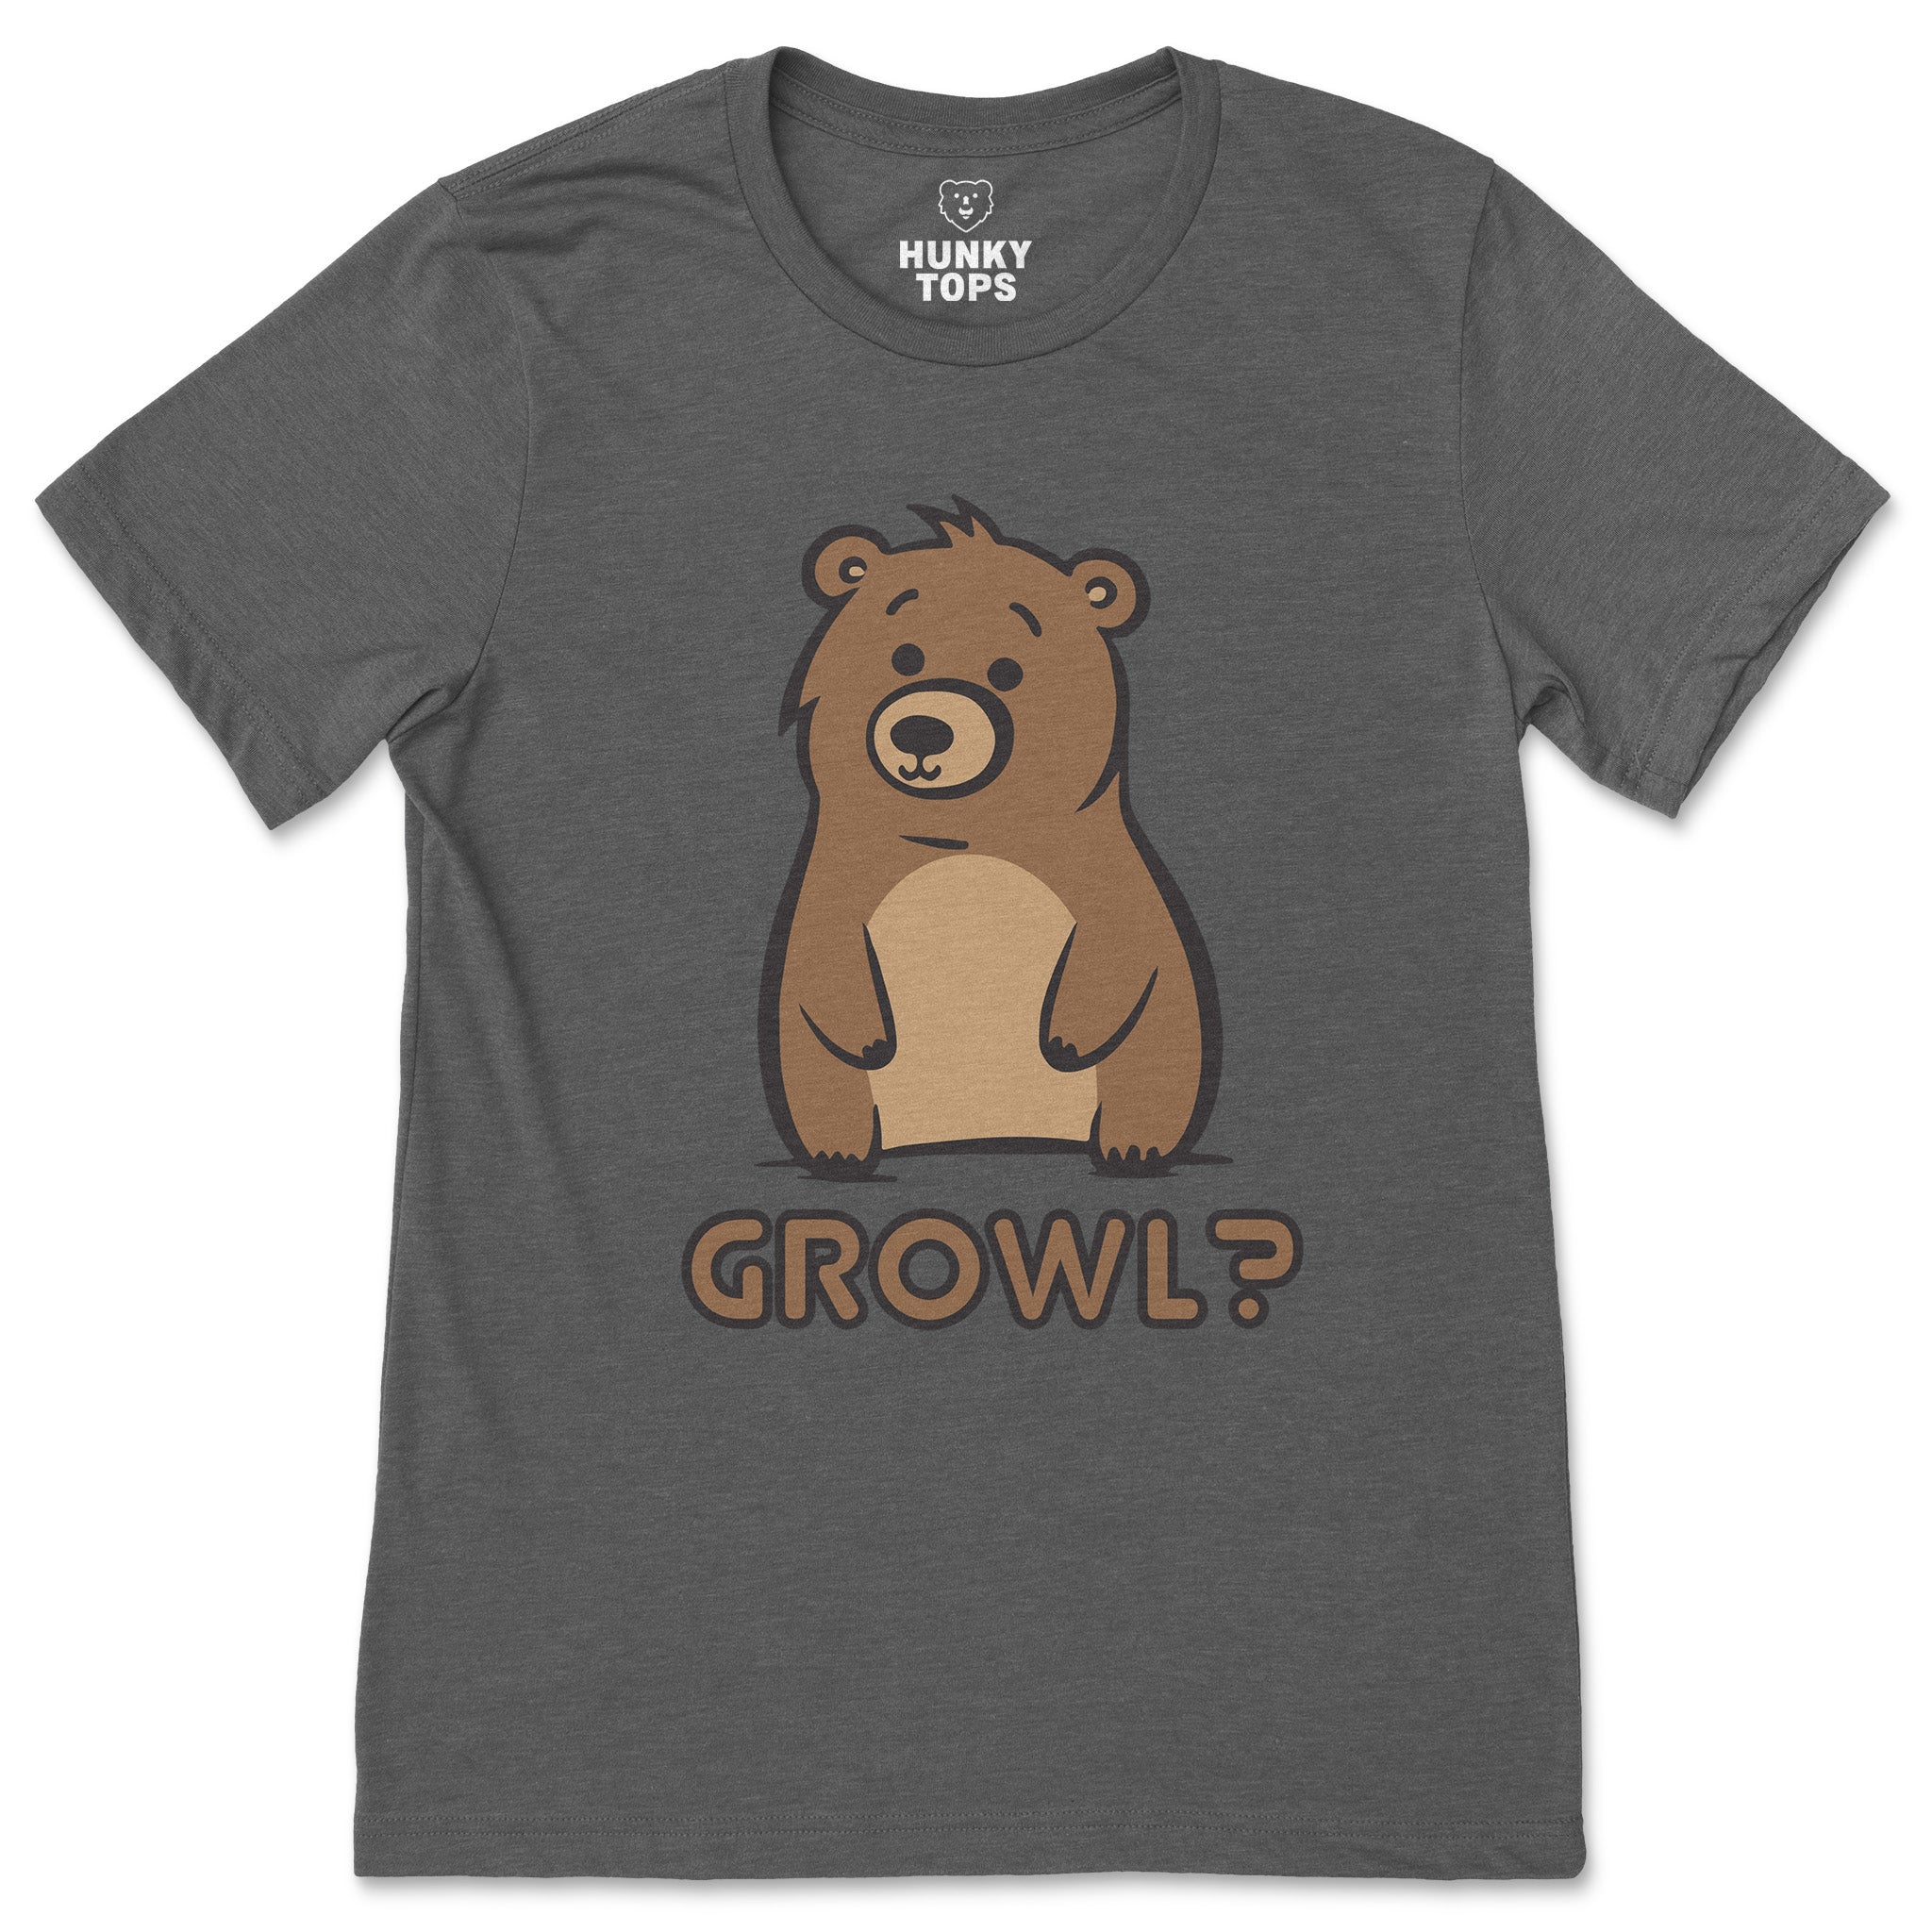 Growl Bear T-Shirt - Cute and Expressive - Hunky Tops#color_dark grey heather